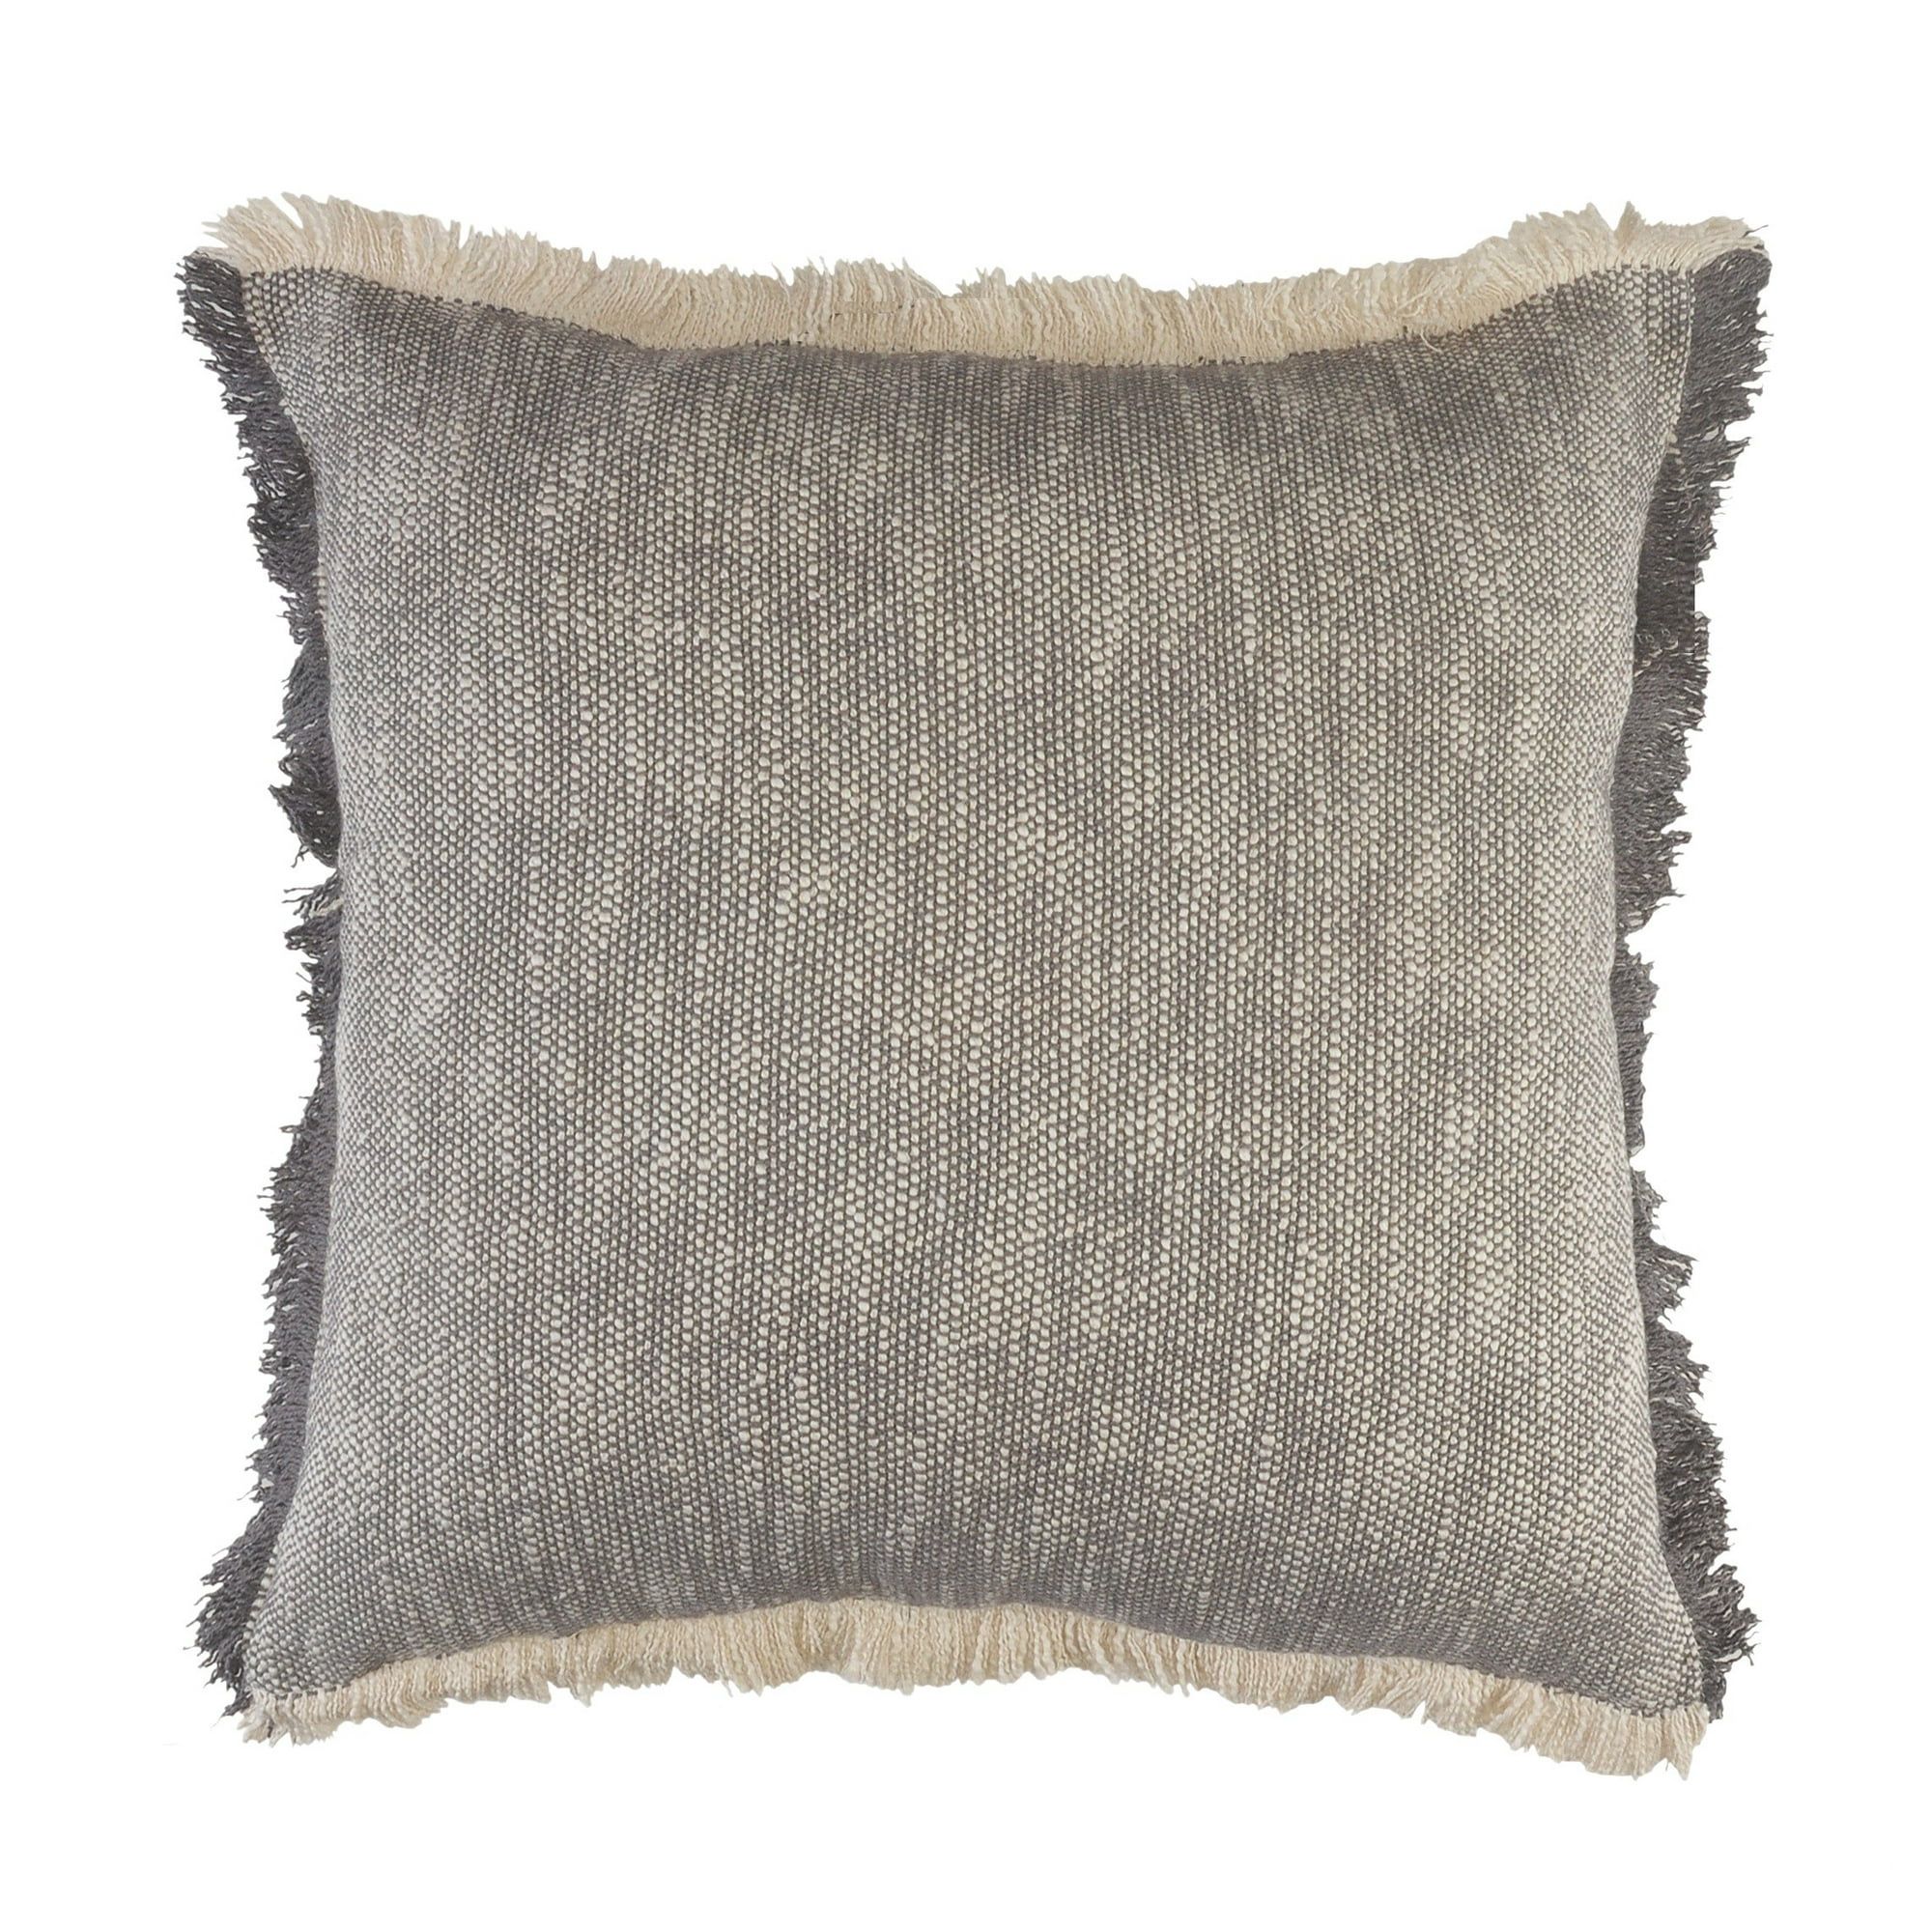 Ox Bay Neutral Two-Tone Fringe Woven Throw Pillow, 20" Square, Gray / White, Count per Pack 1 | Walmart (US)